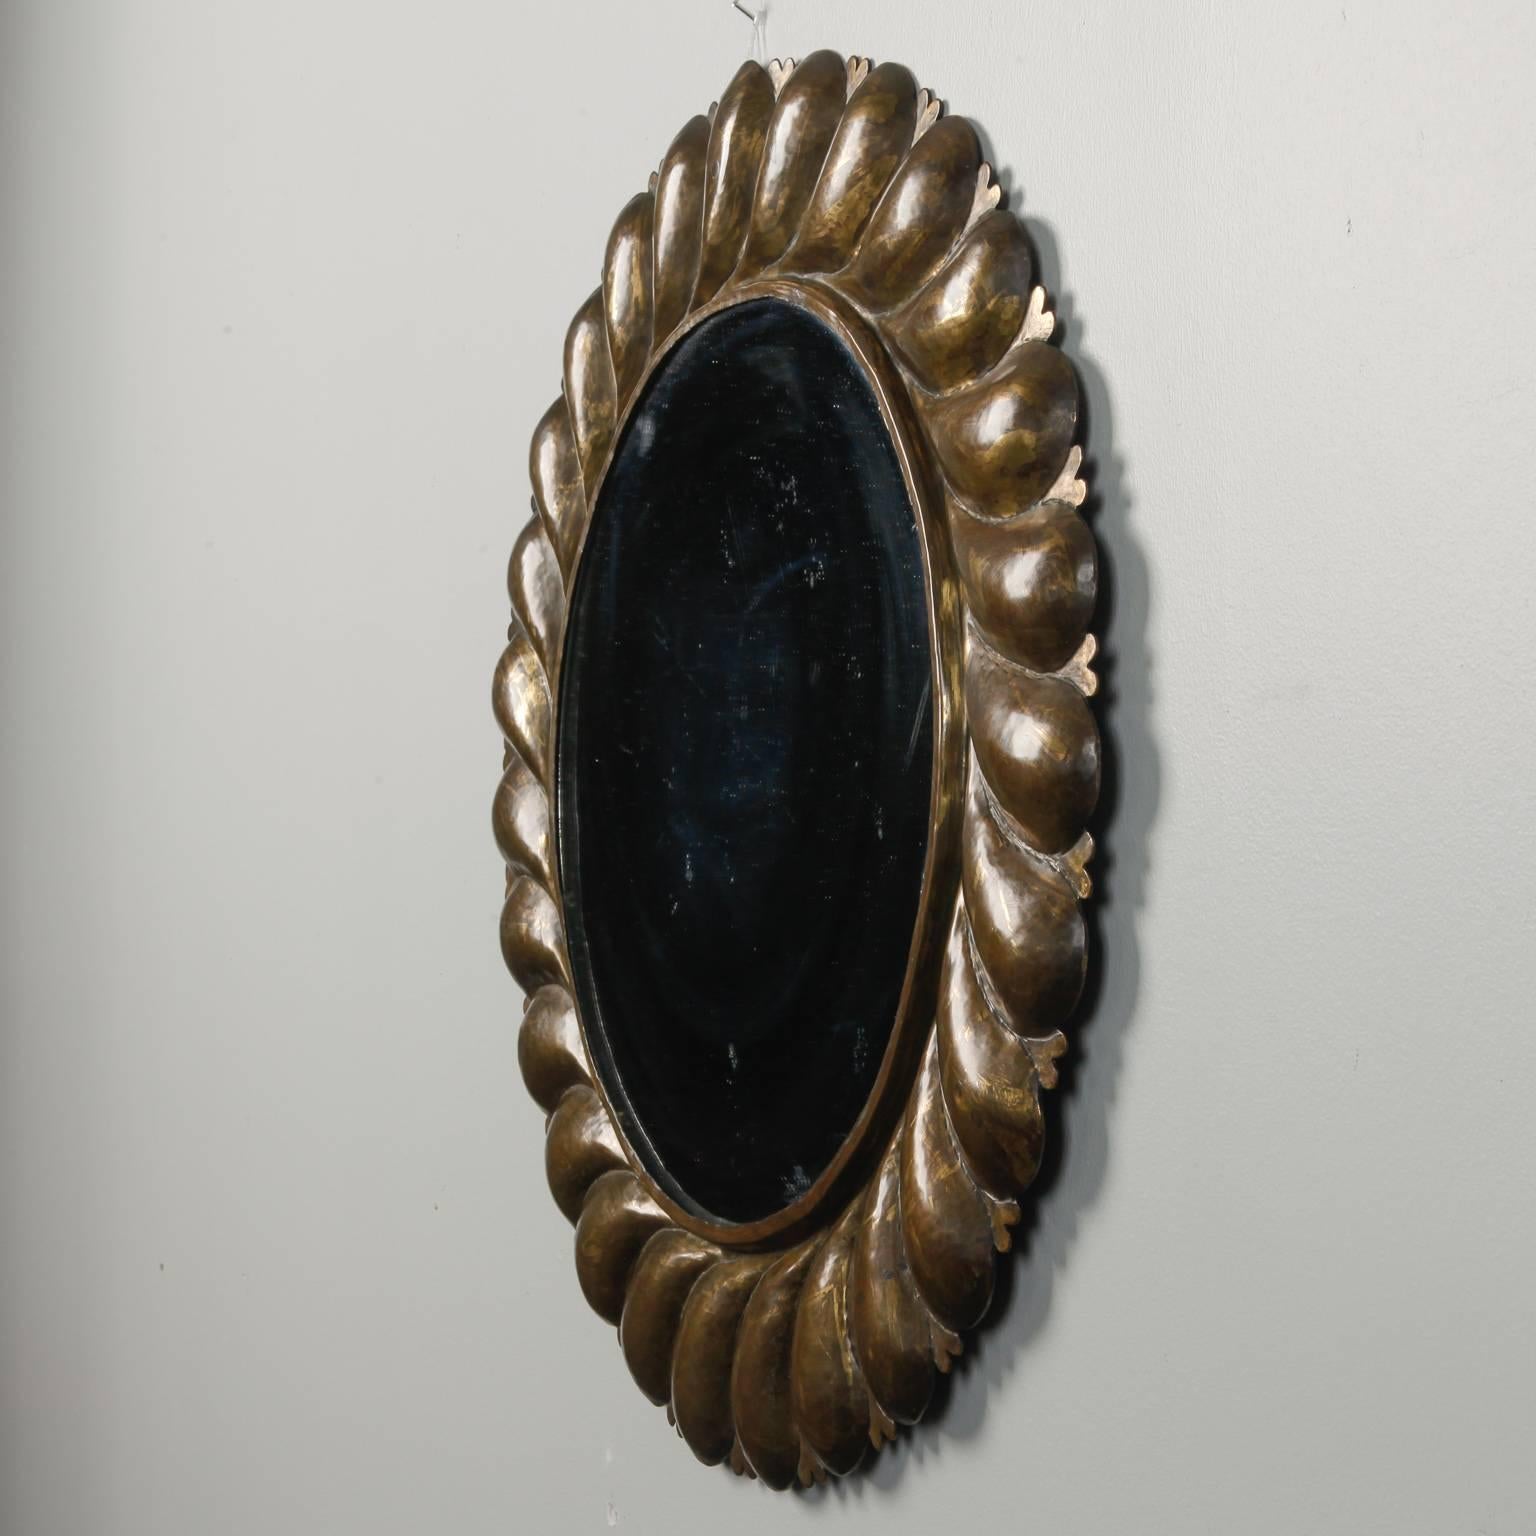 Round mirror framed in brass with a petal-like design in relief, circa 1970s. Found in Italy.